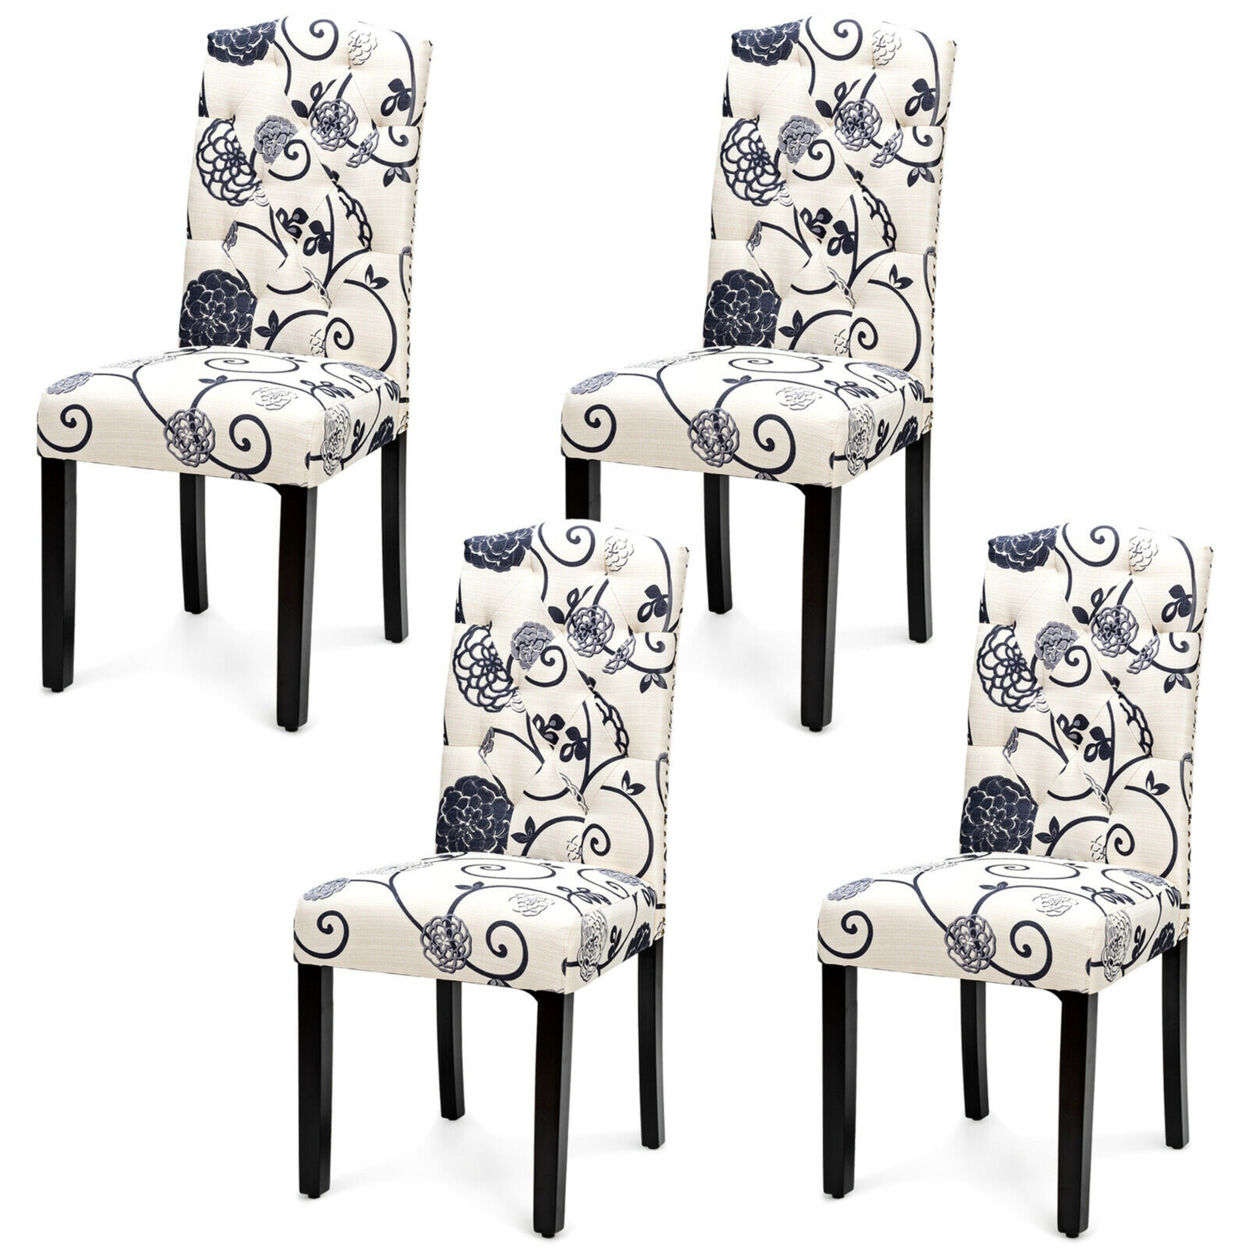 Set Of 4 Tufted Dining Chair Upholstered Nailhead Trim Rubber Wooden Leg